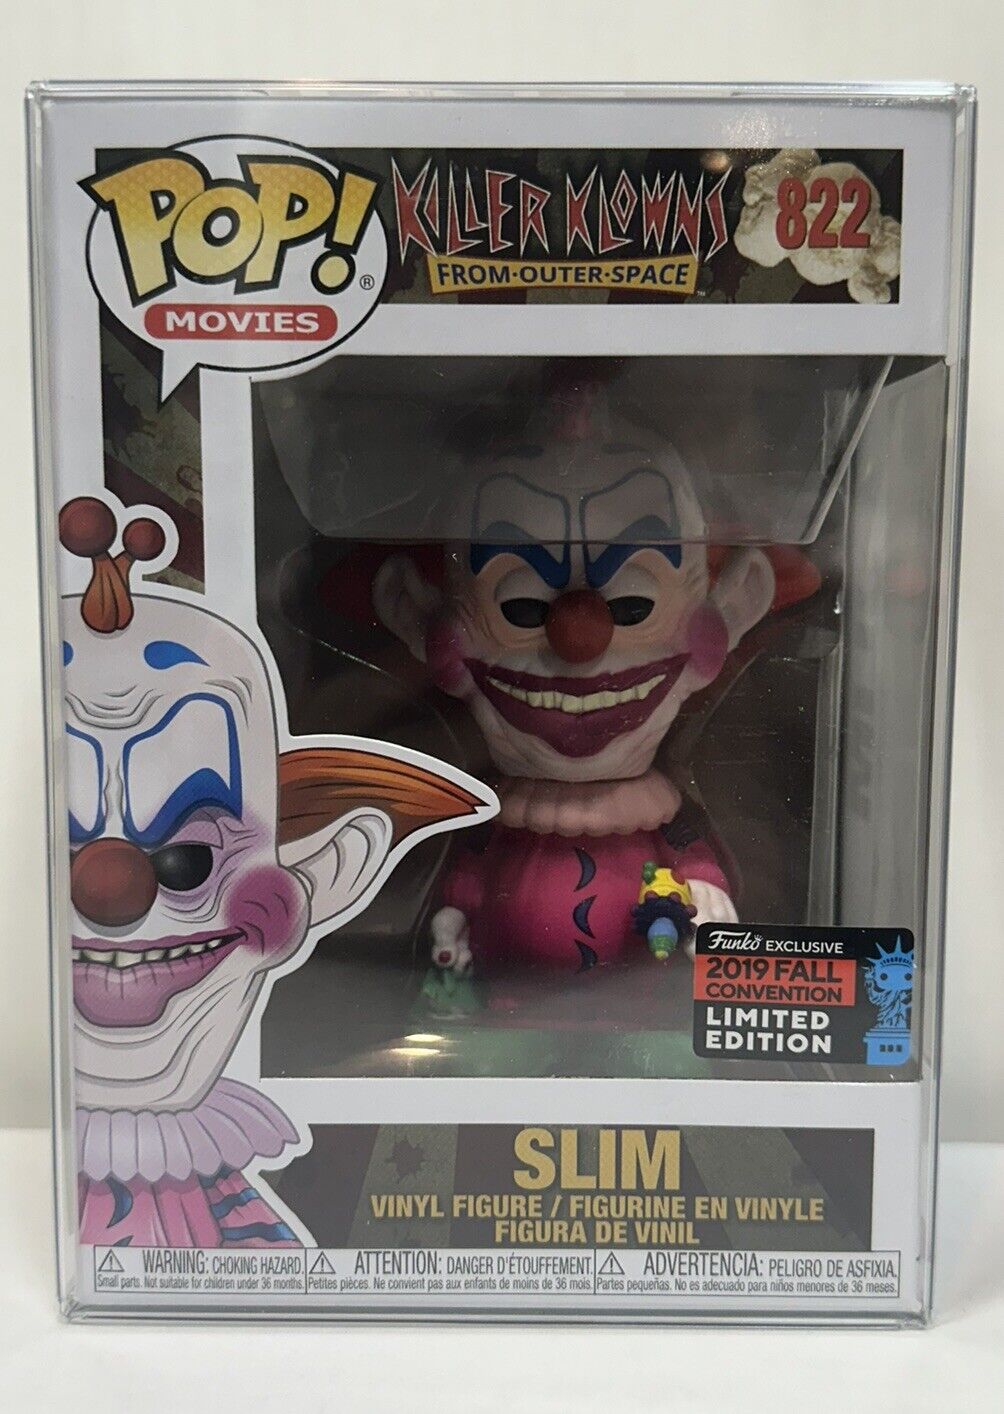 Funko Pop Movies: Killer Klowns From Outer Space -Slim 822  (2019 Fall Con)